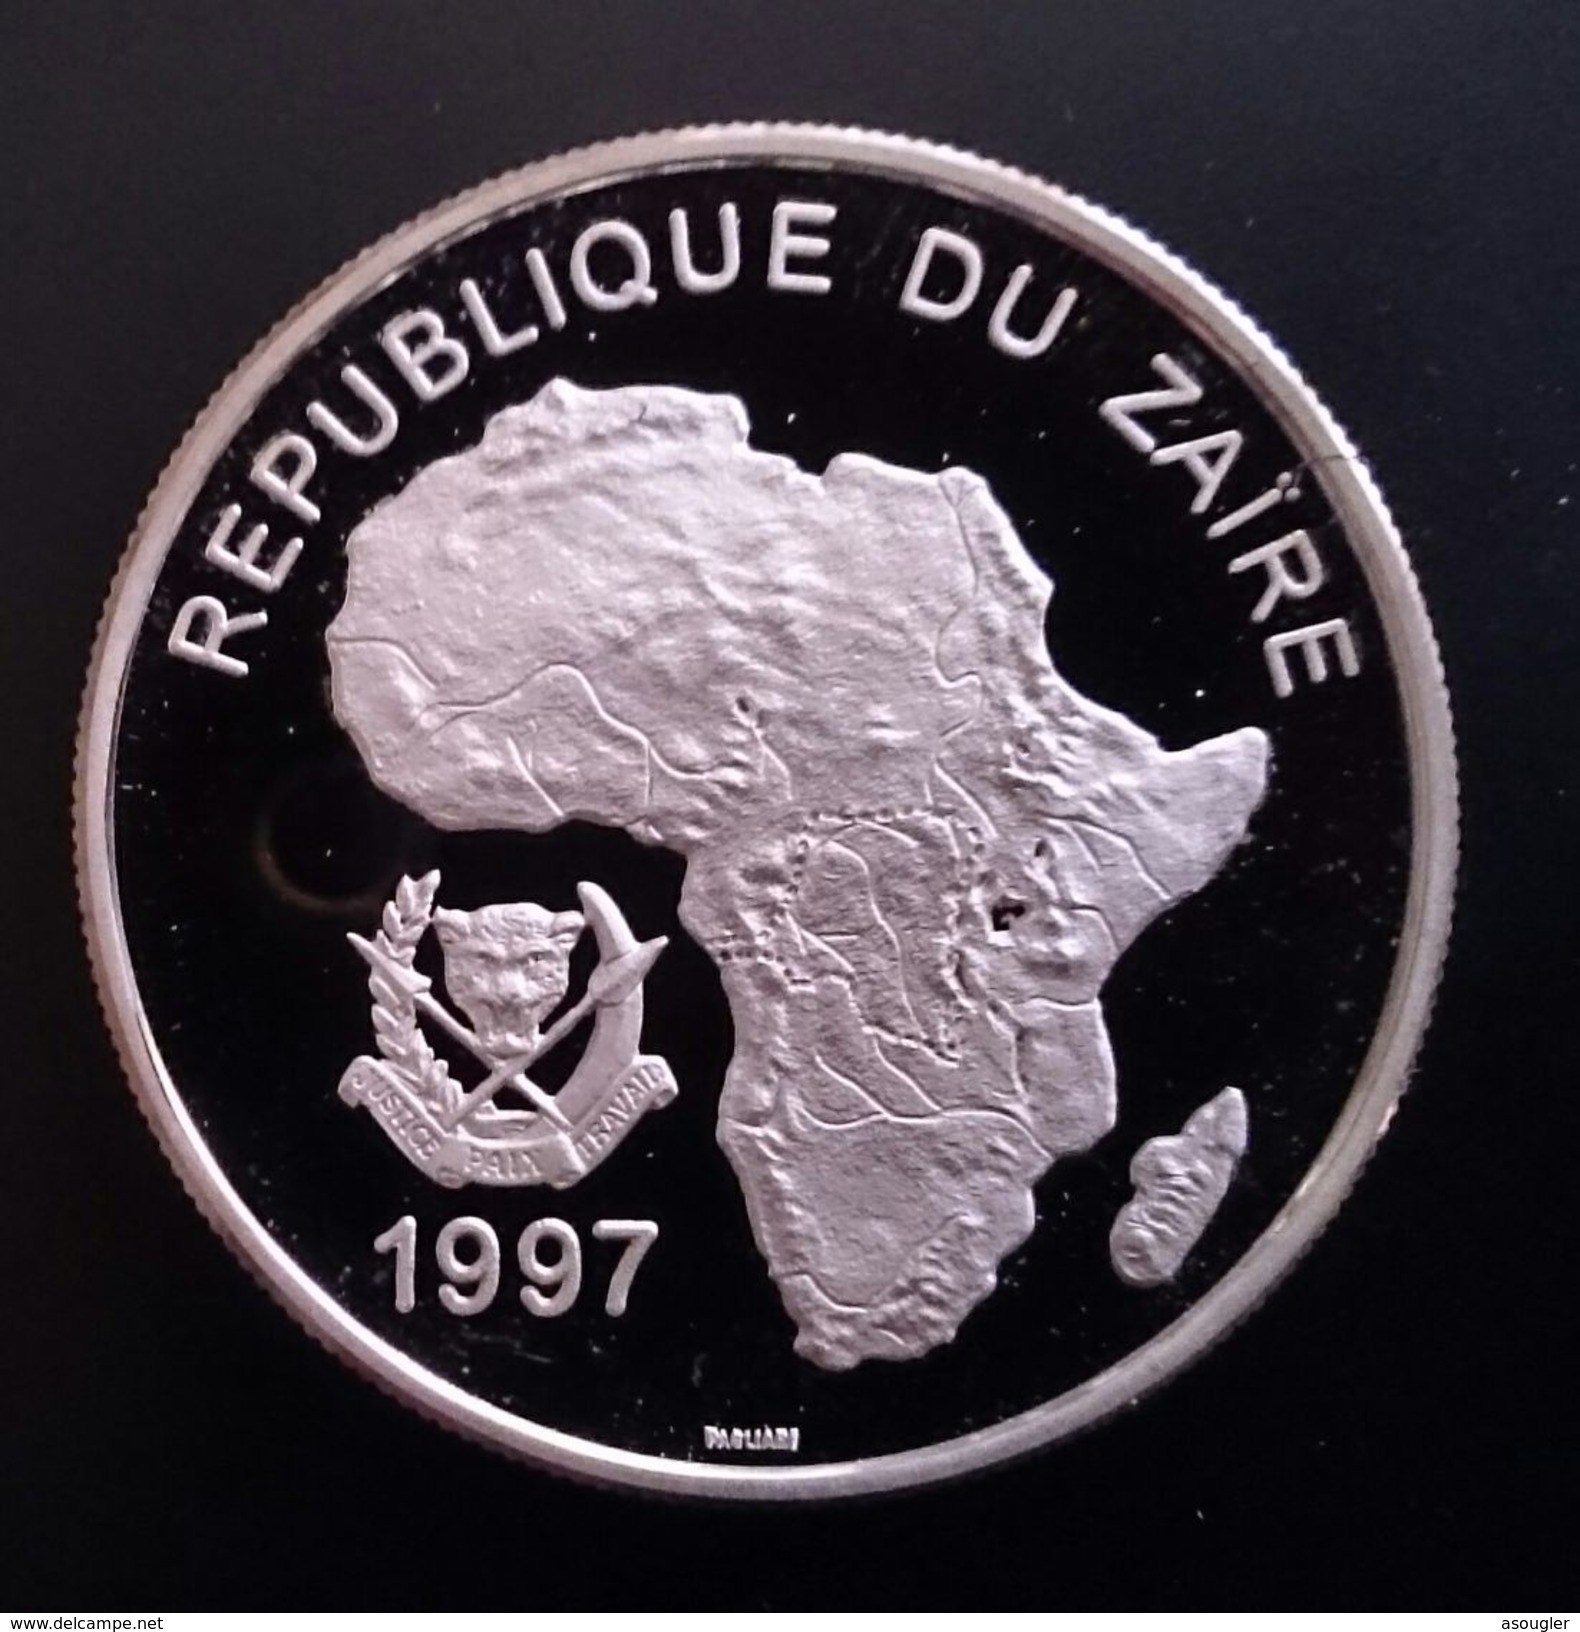 ZAIRE 1000 NOUVEAUX ZAIRES 1997 SILVER PROOF "Wildlife Of Africa" Free Shipping Via Registered Air Mail - Zaire (1971 -97)